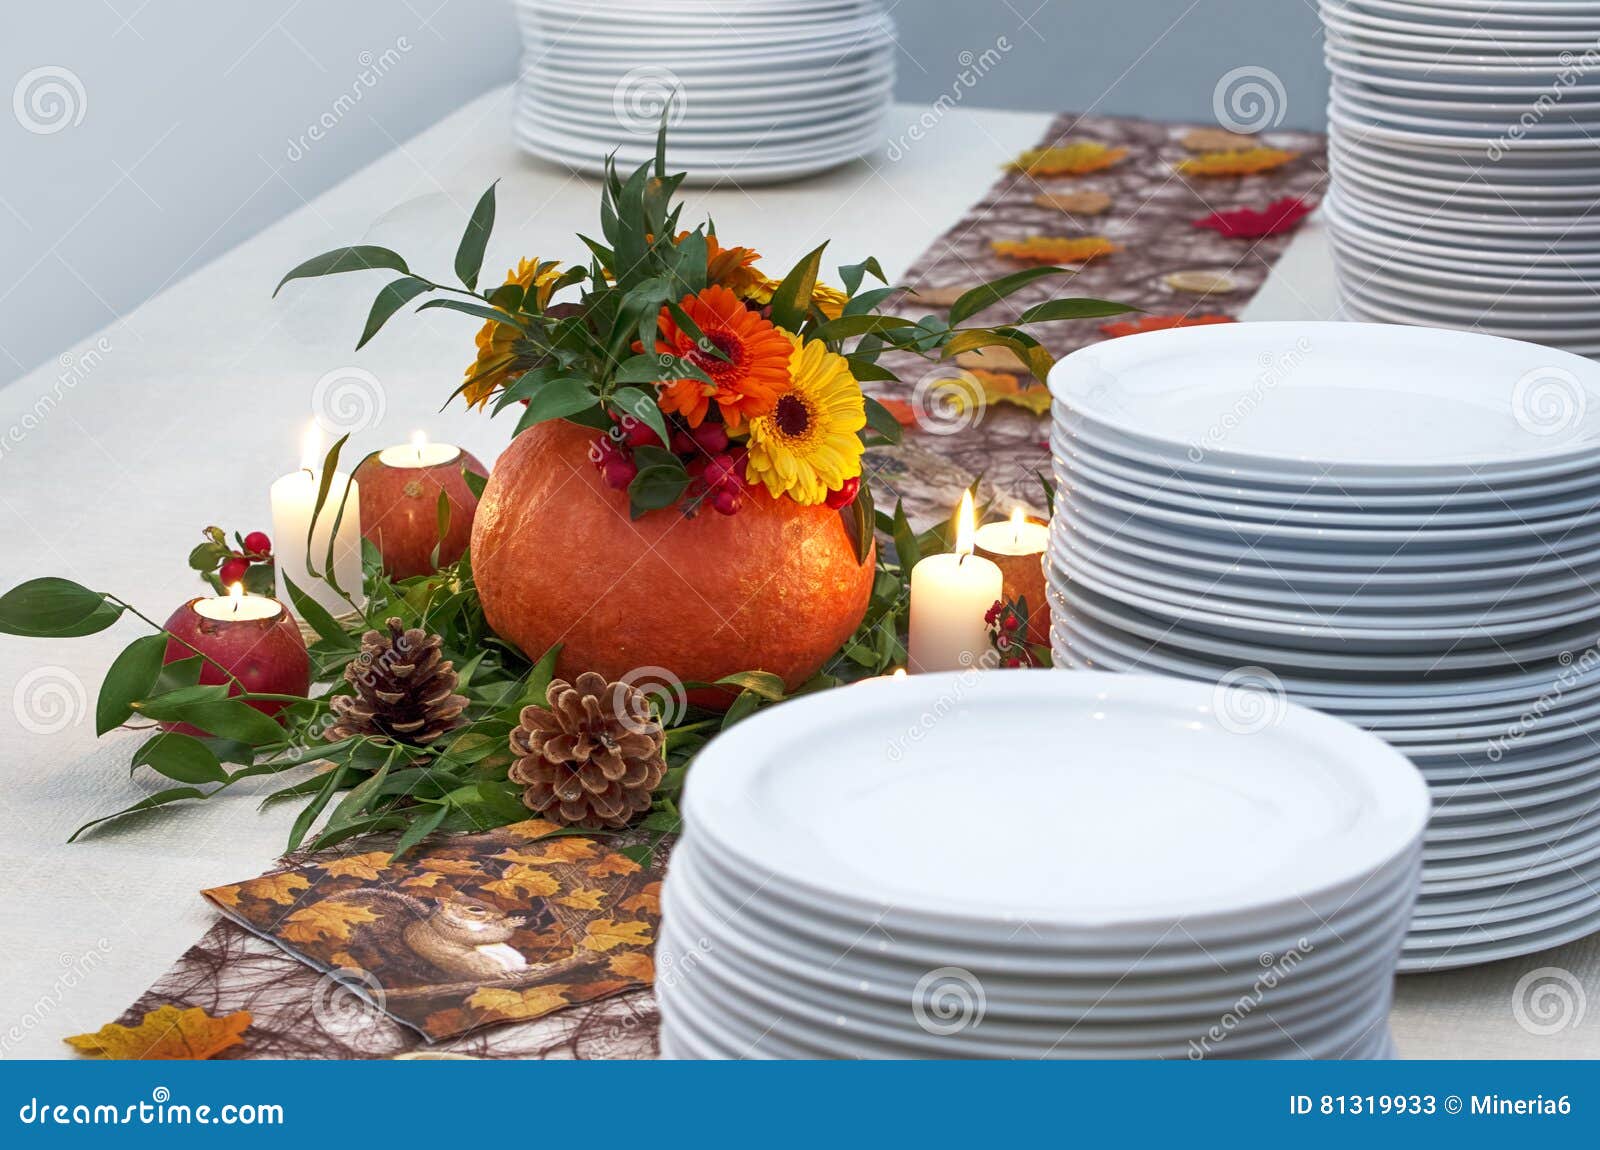 Catering Service Table Set Decoration Stock Image - Image of flower ...